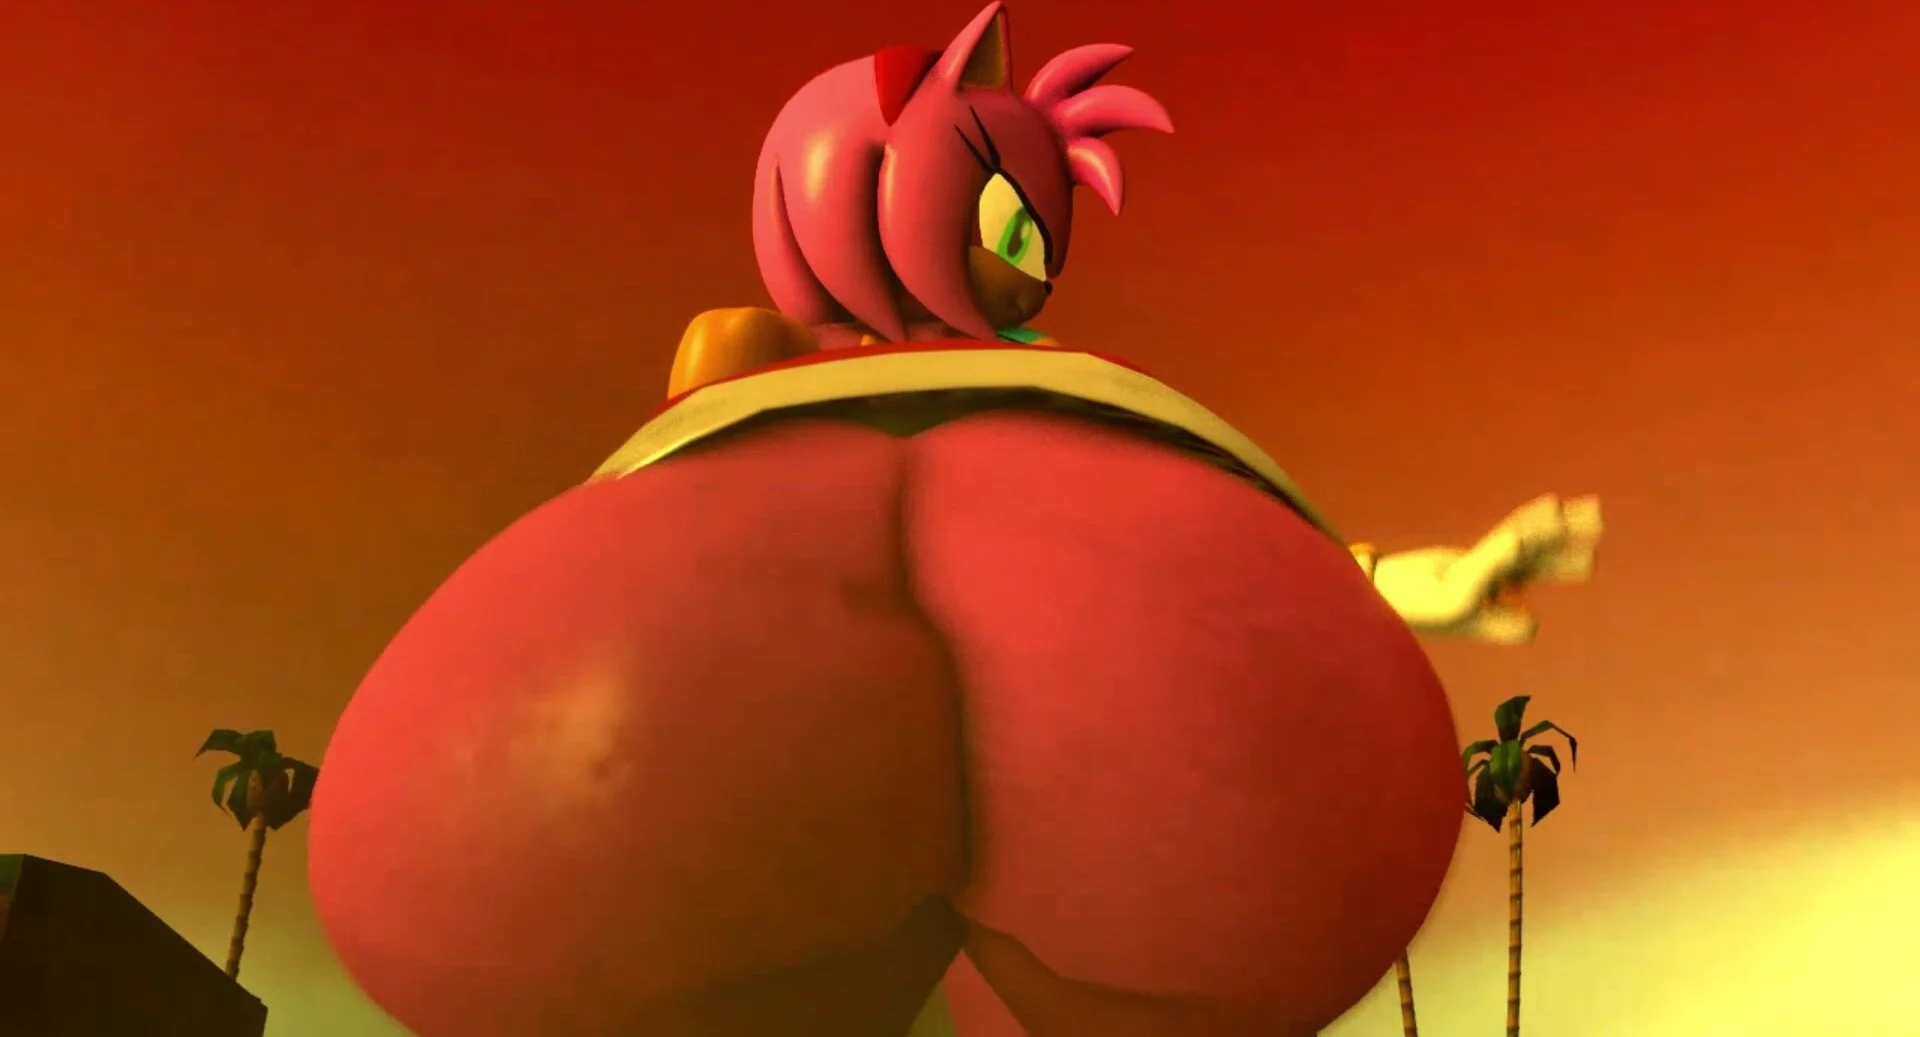 Amy Anal Vore Porn - Amy Rose Anal Vores rouge and tries to seduce sonic - ThisVid.com